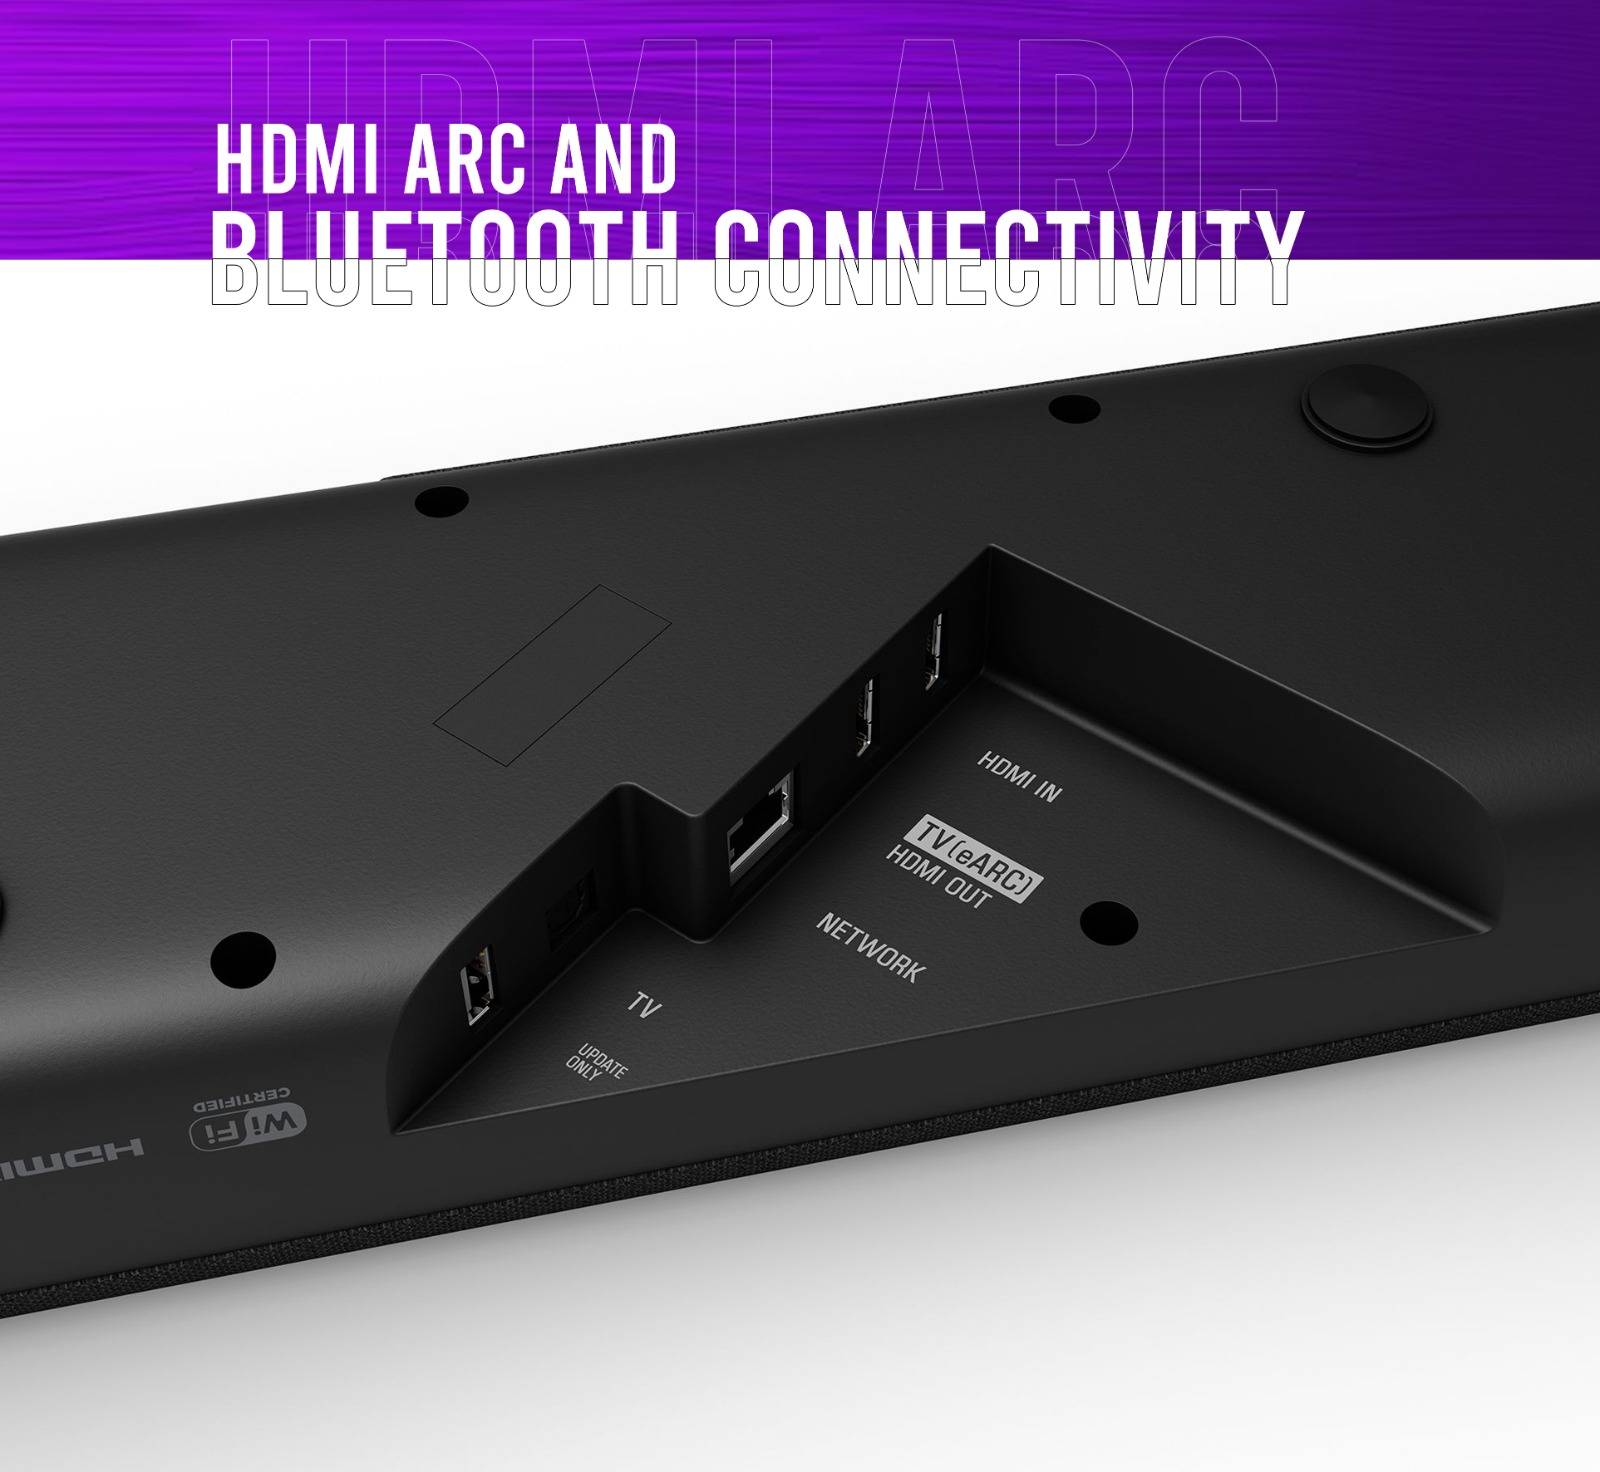 HDMI ARC and Bluetooth Connectivity